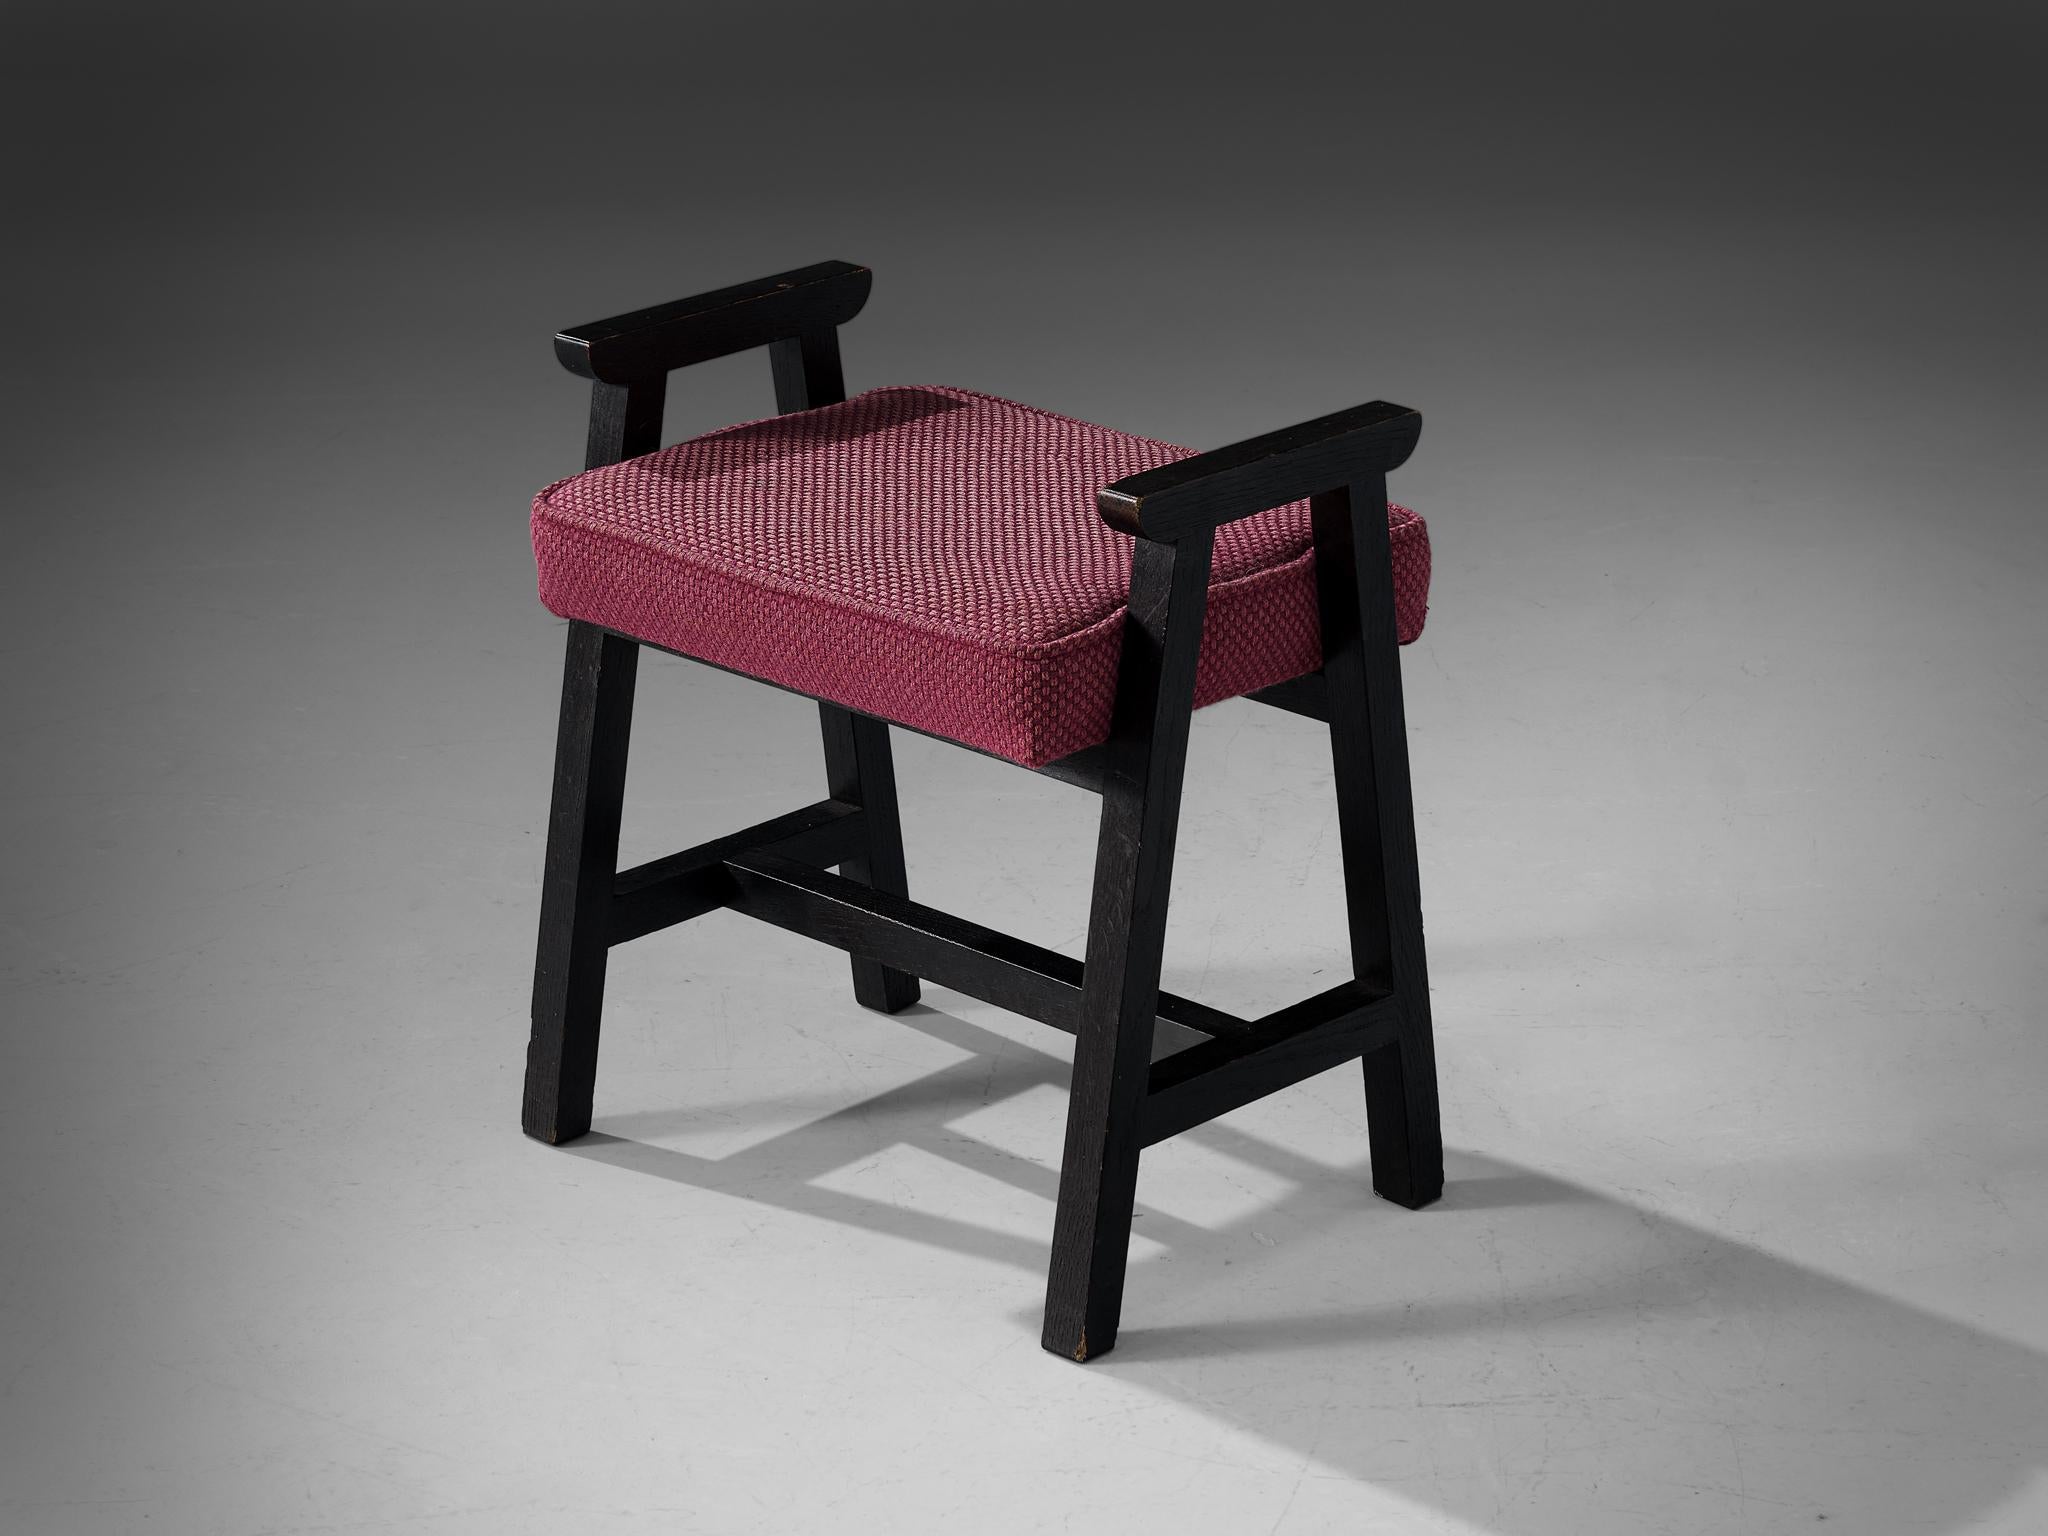 Guillerme & Chambron ‘Grégoire’ Stool in Stained Oak and Pink Upholstery